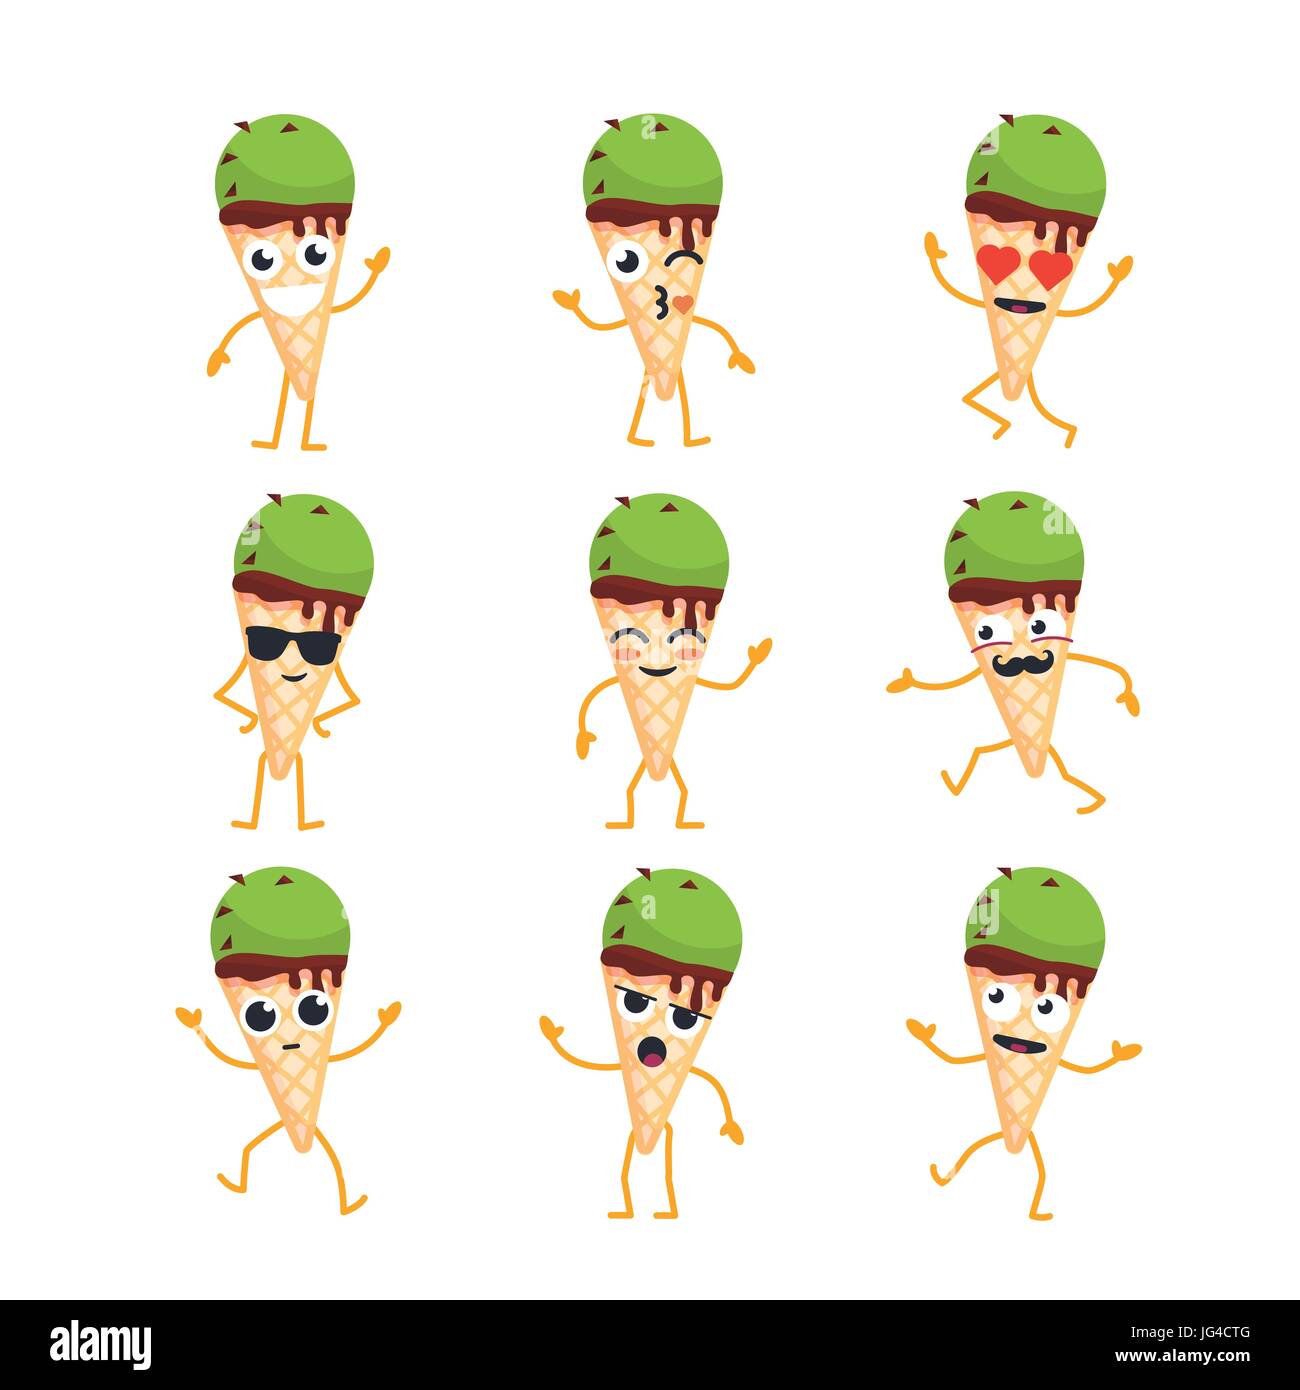 Ice Cream Cartoon Character - modern vector template set of mascot illustrations. Gift images of an ice cream dancing, smiling, having a good time. Em Stock Vector